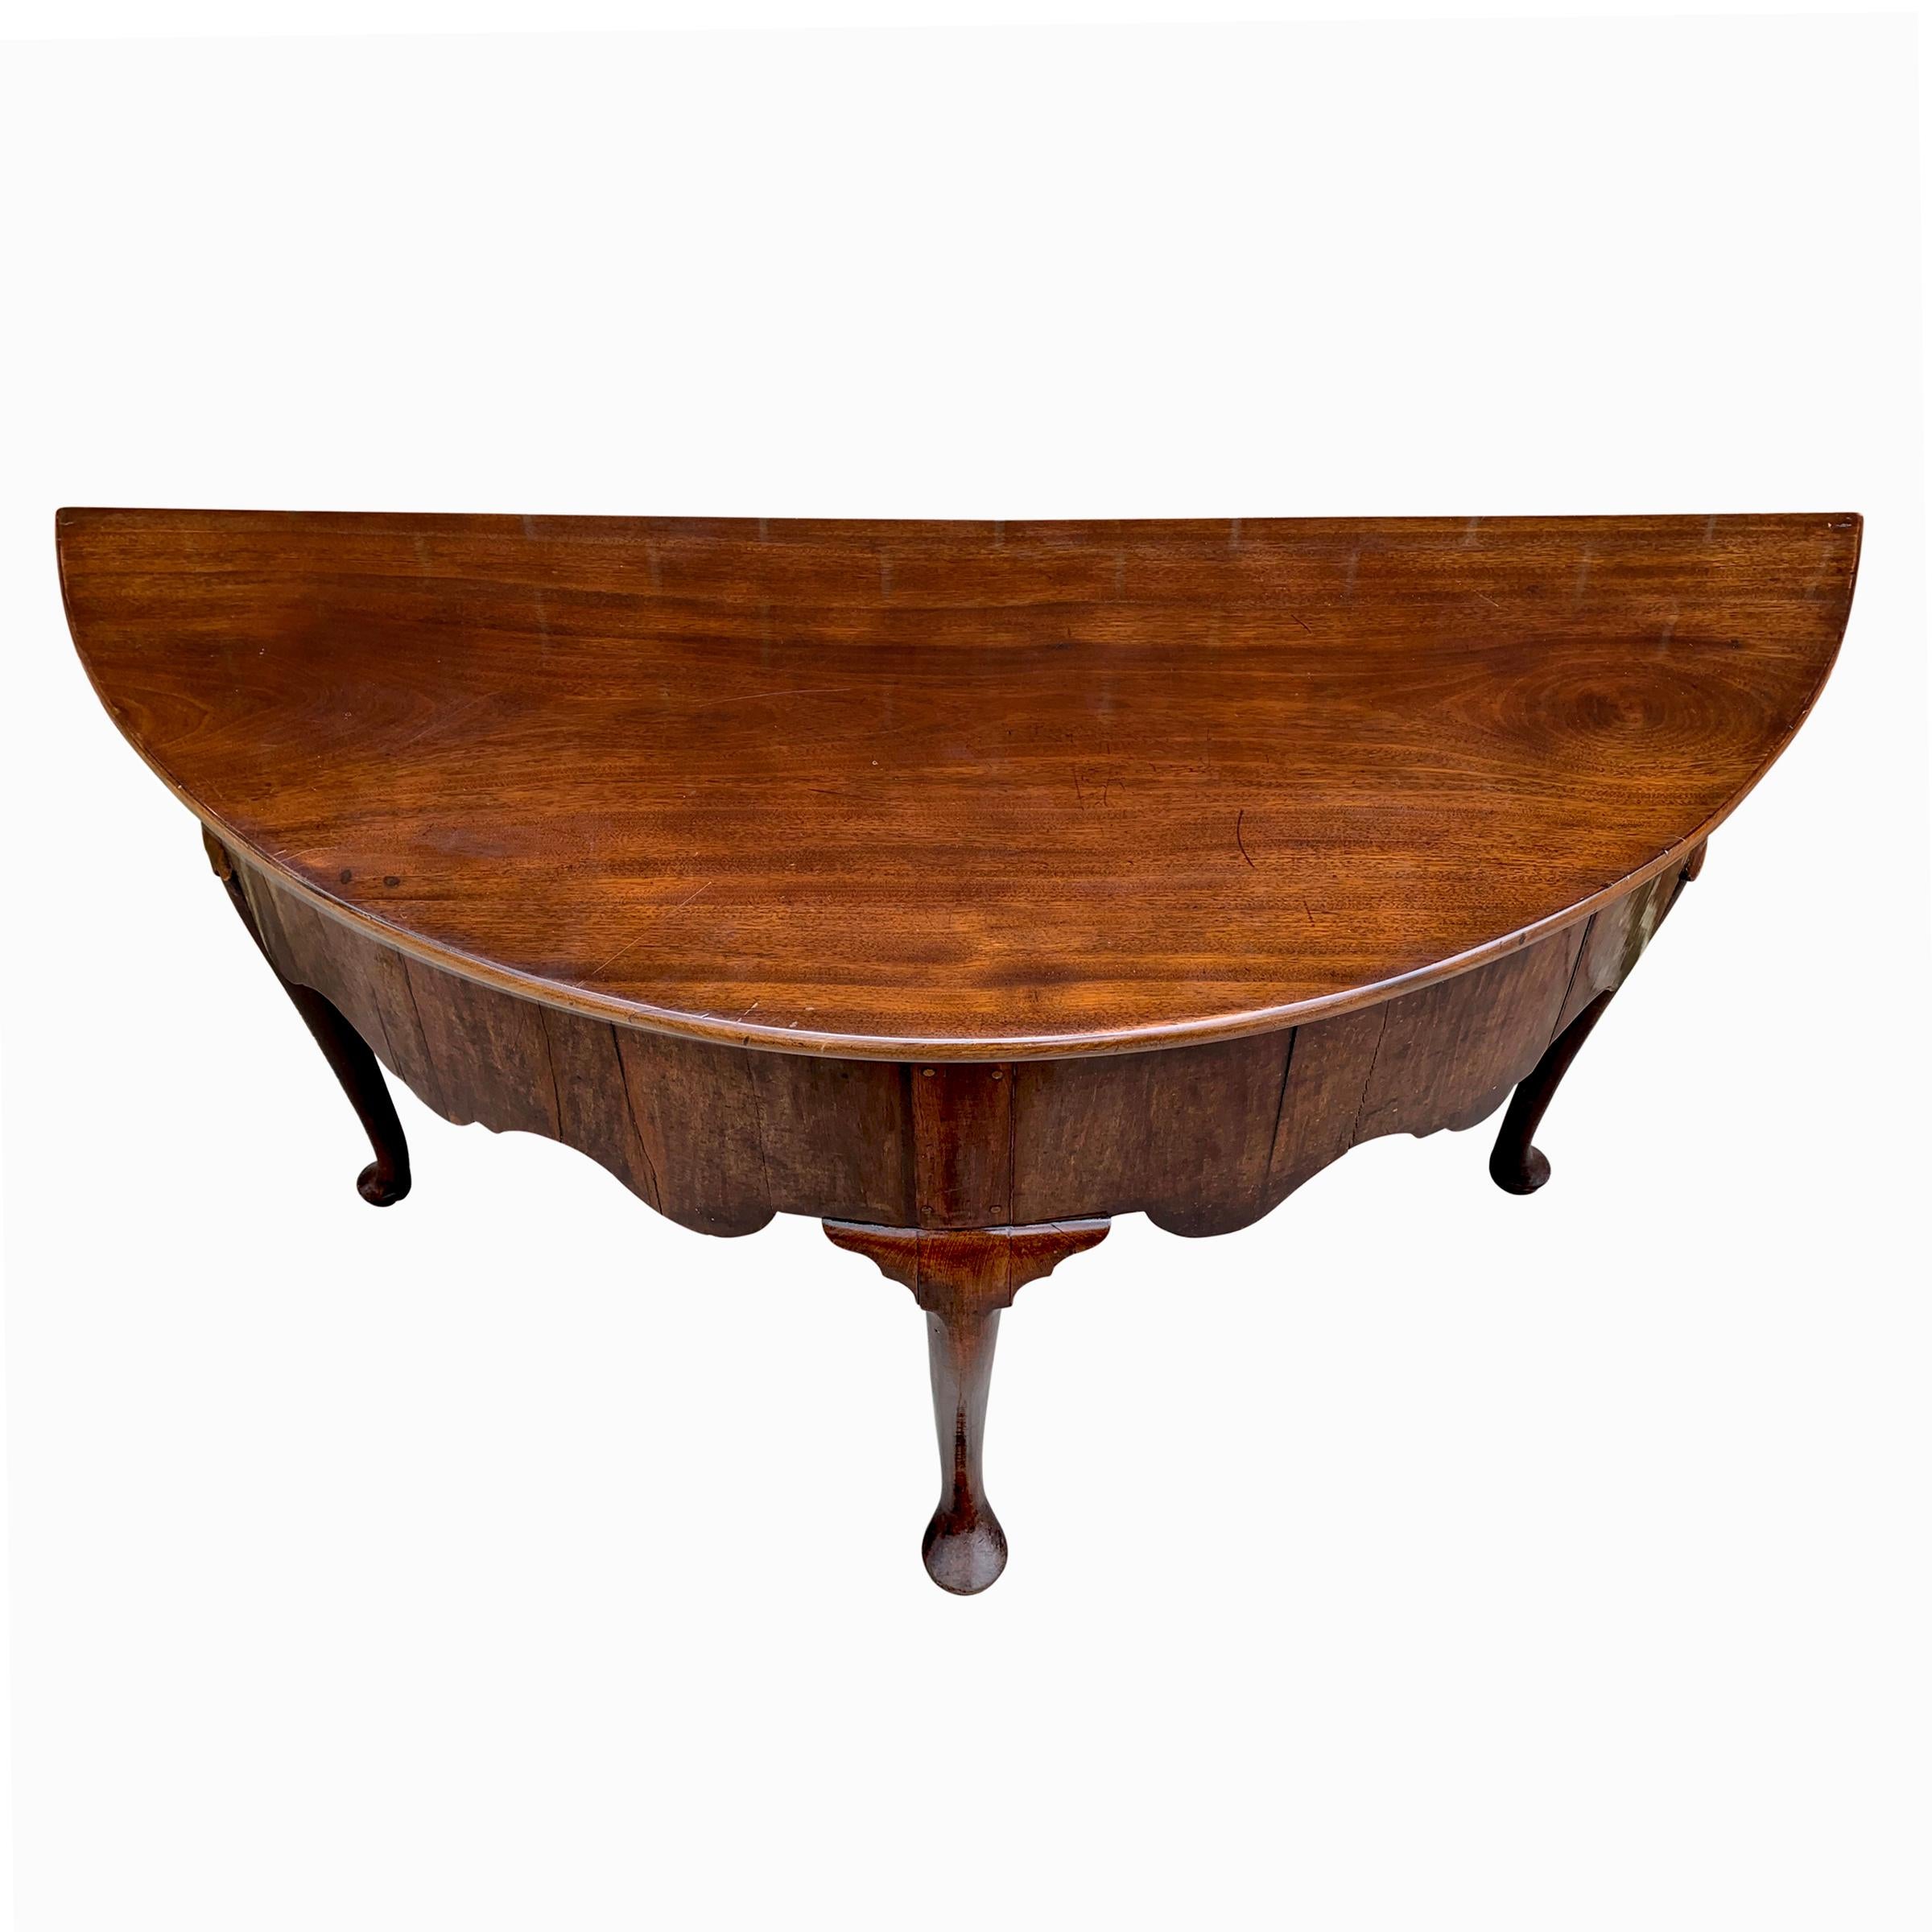 Queen Anne 18th Century English Demilune Table